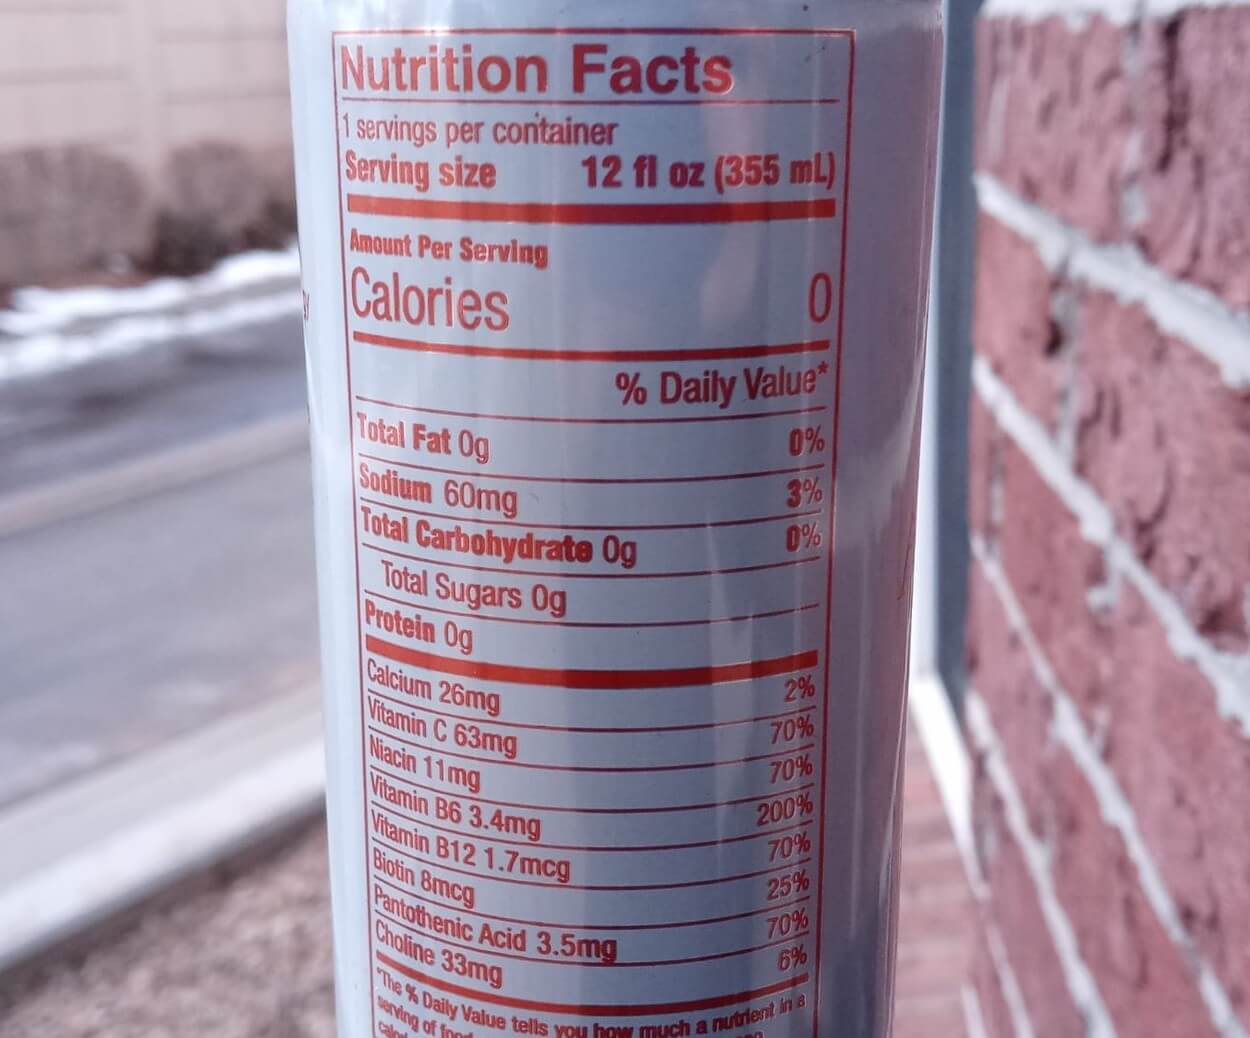 Nutritional facts of a can of Aspire. 